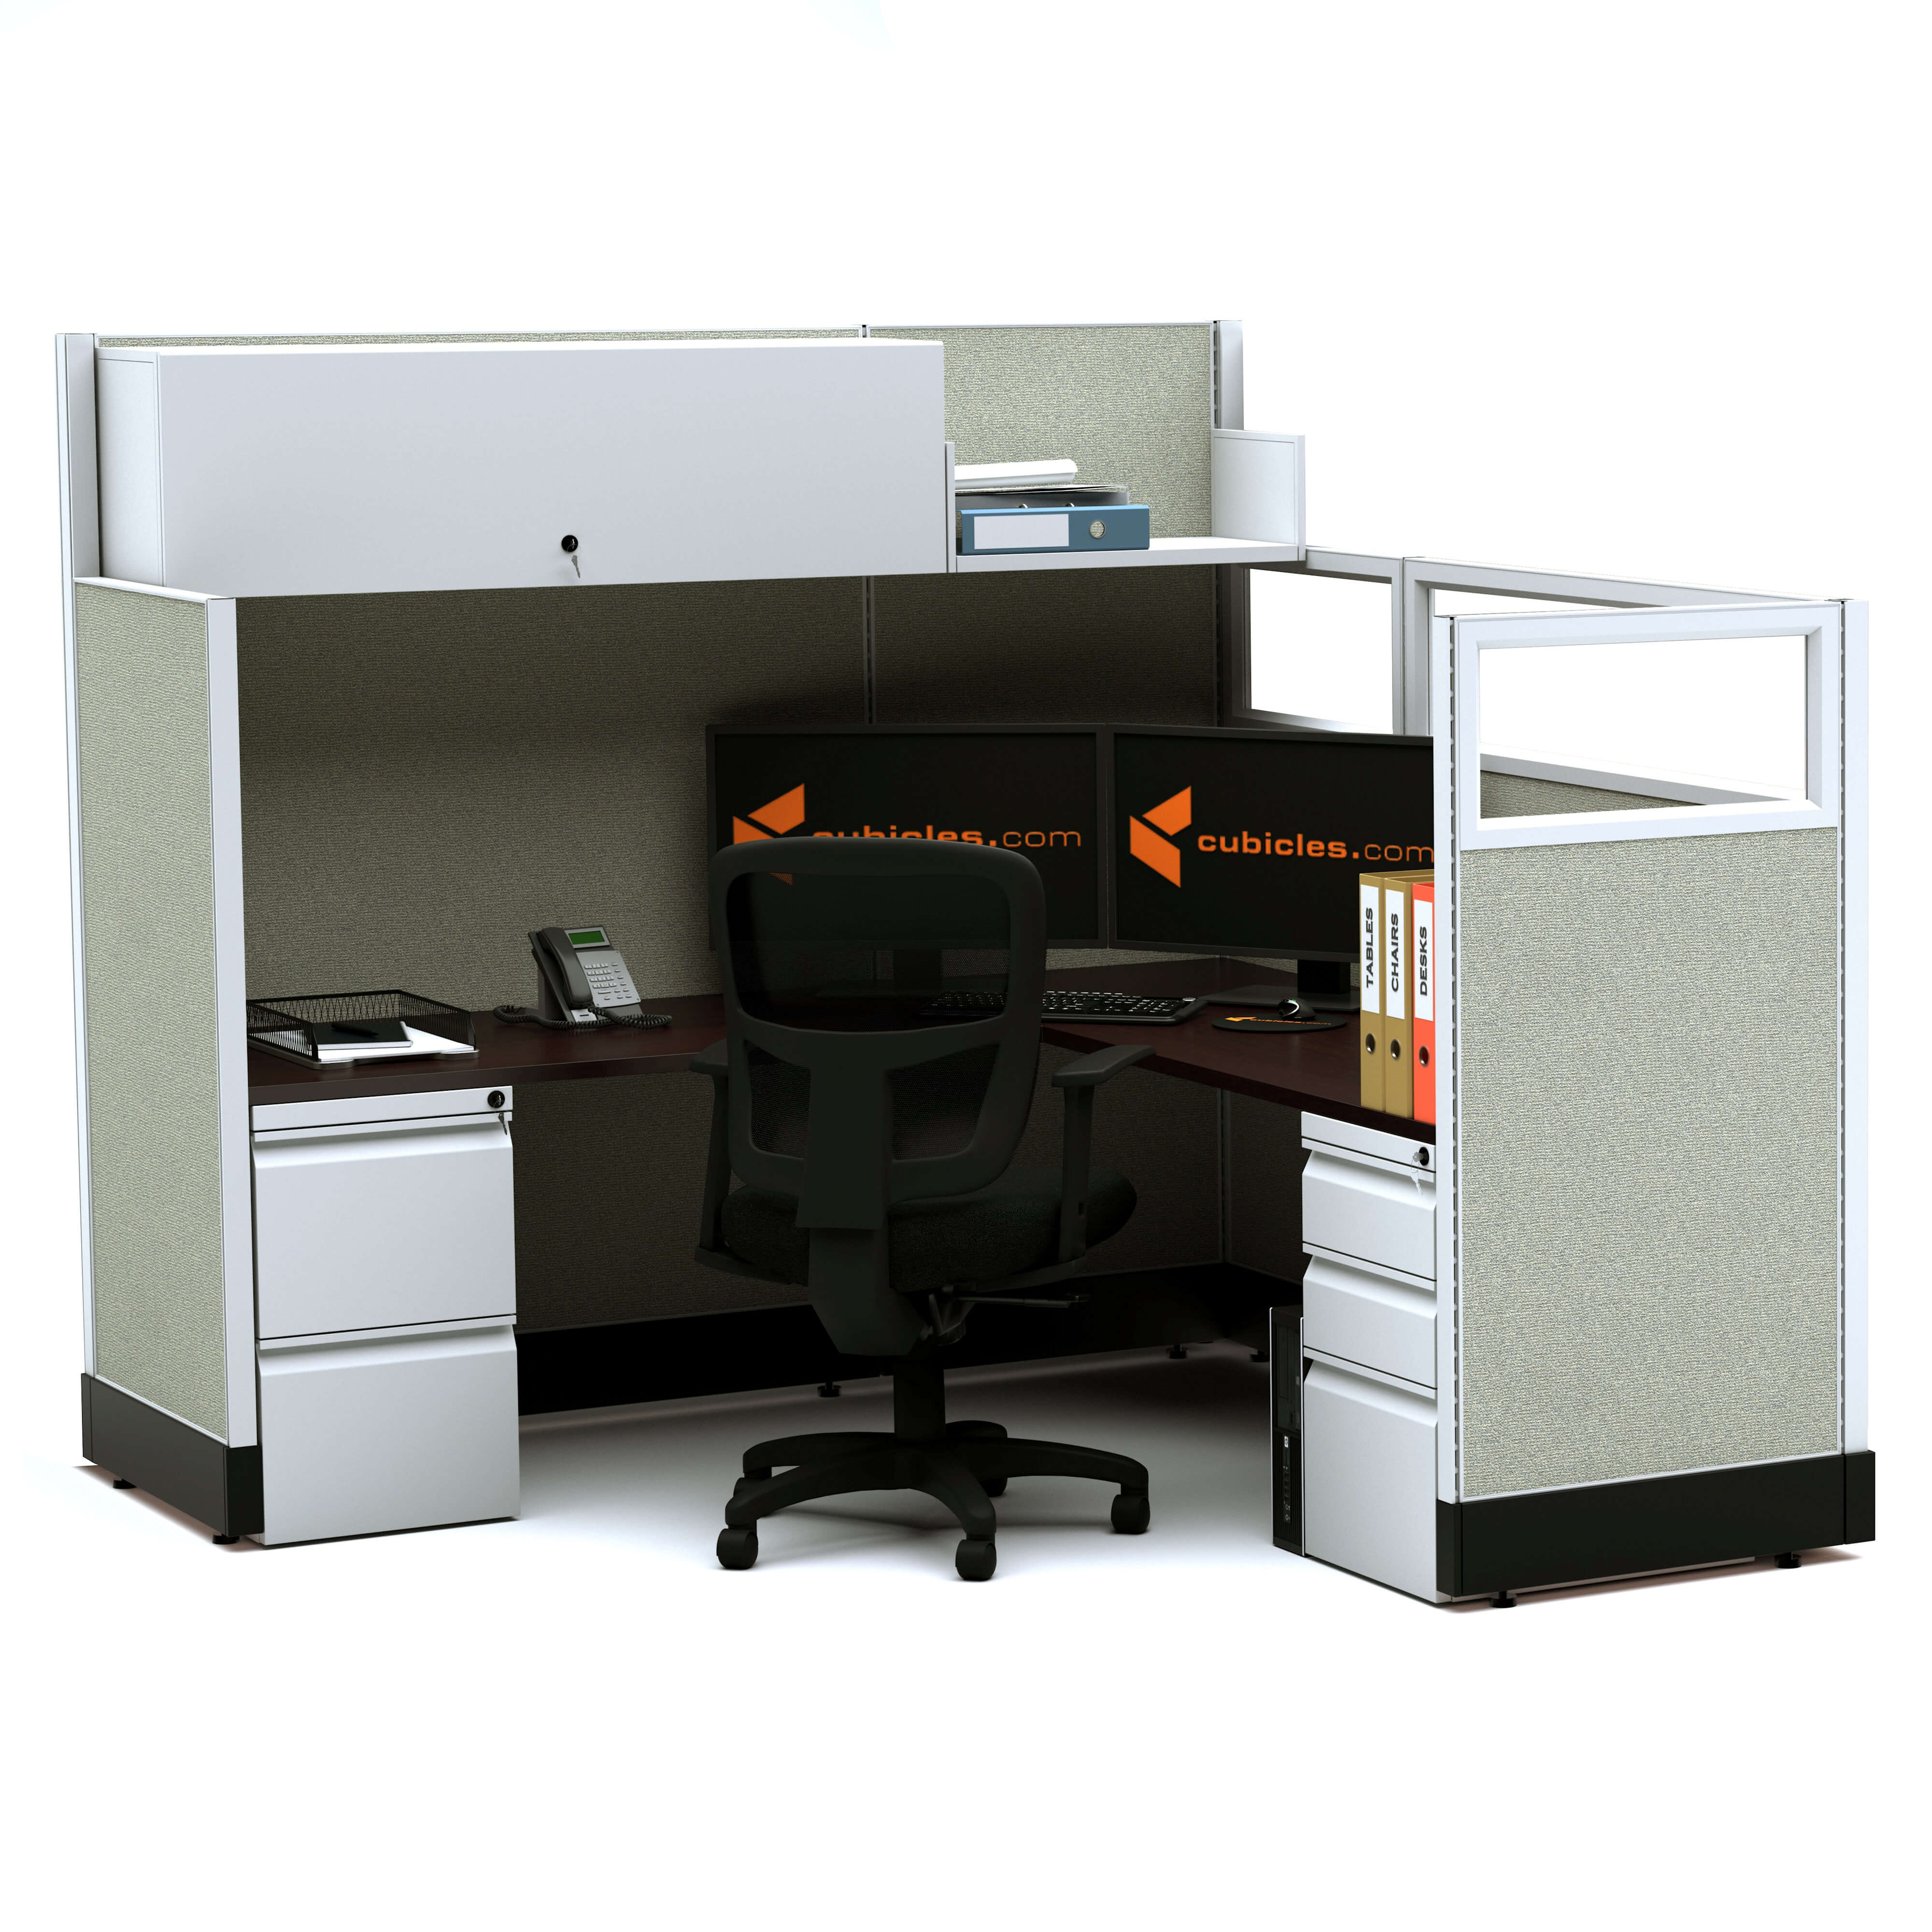 modular-office-furniture-partial-glass-office-cubicles-53-67h-single-non-powered.jpg